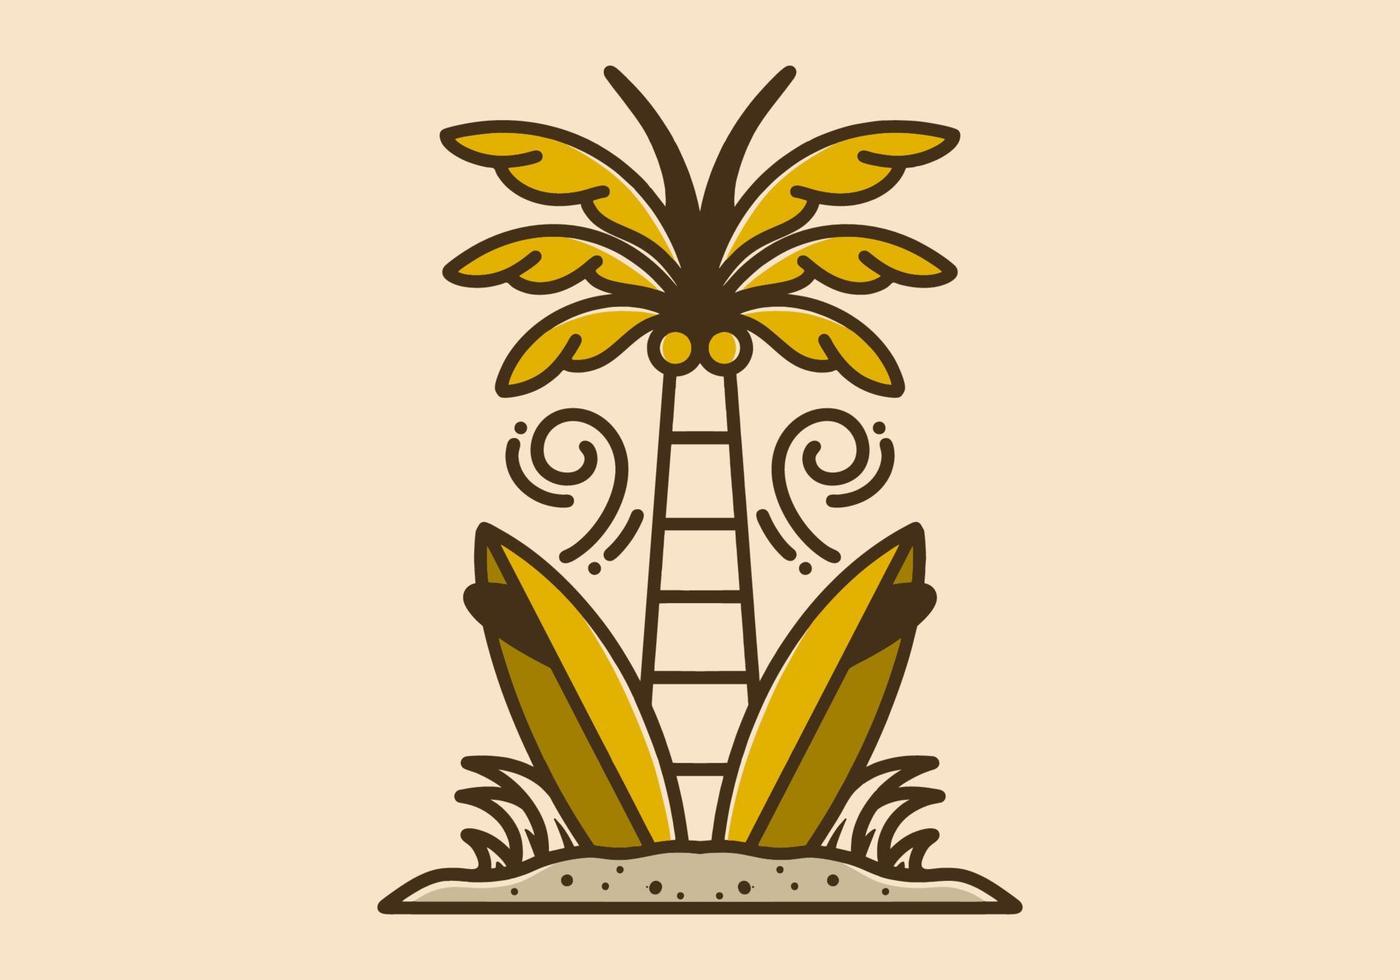 Vintage illustration of a coconut tree and two surfing board vector